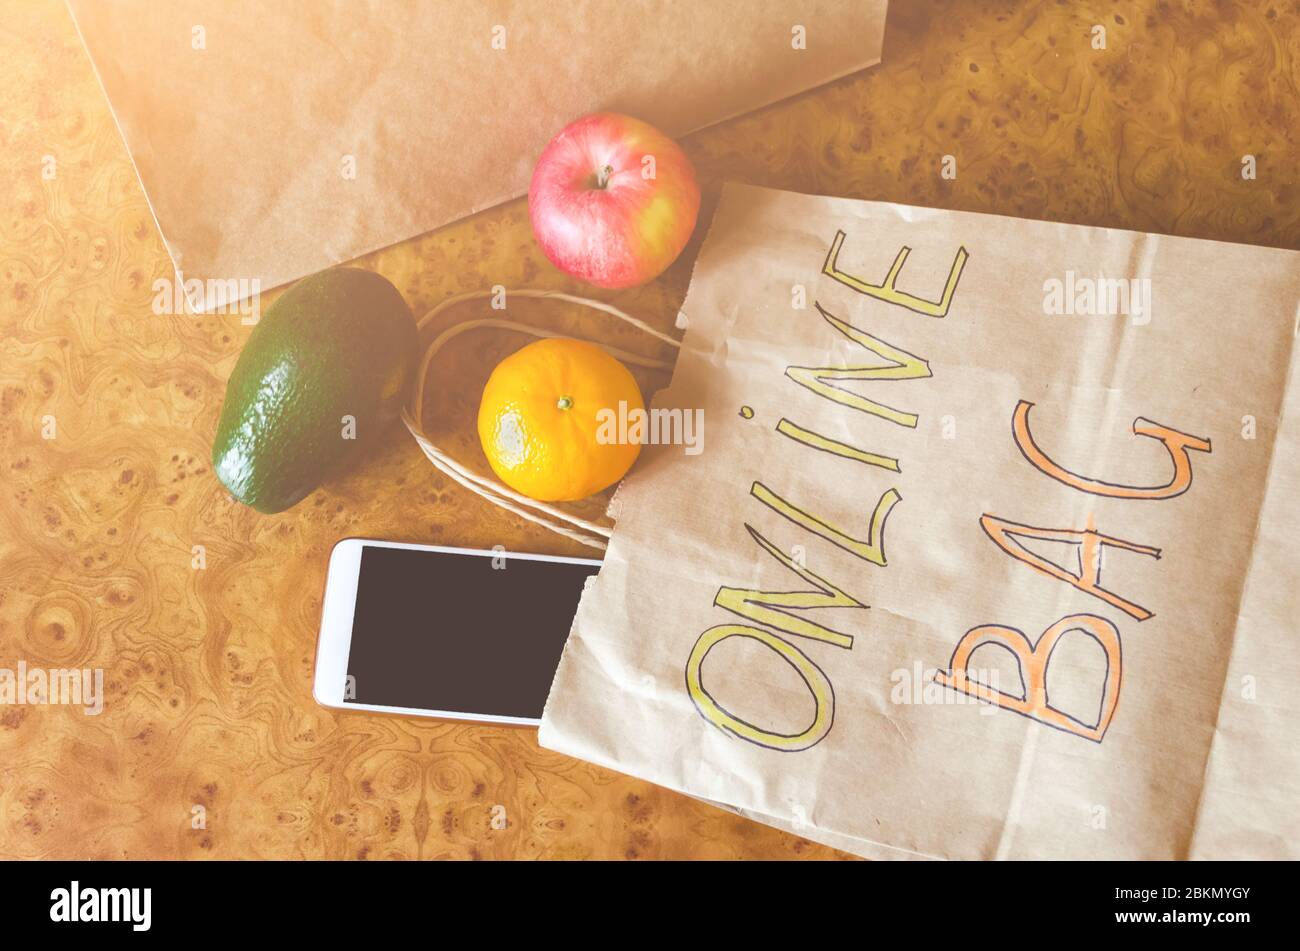 Paper bag with inscription - Online bag, different fresh fruits, vegetables on wooden background. Online shopping and contactless delivery concept. To Stock Photo